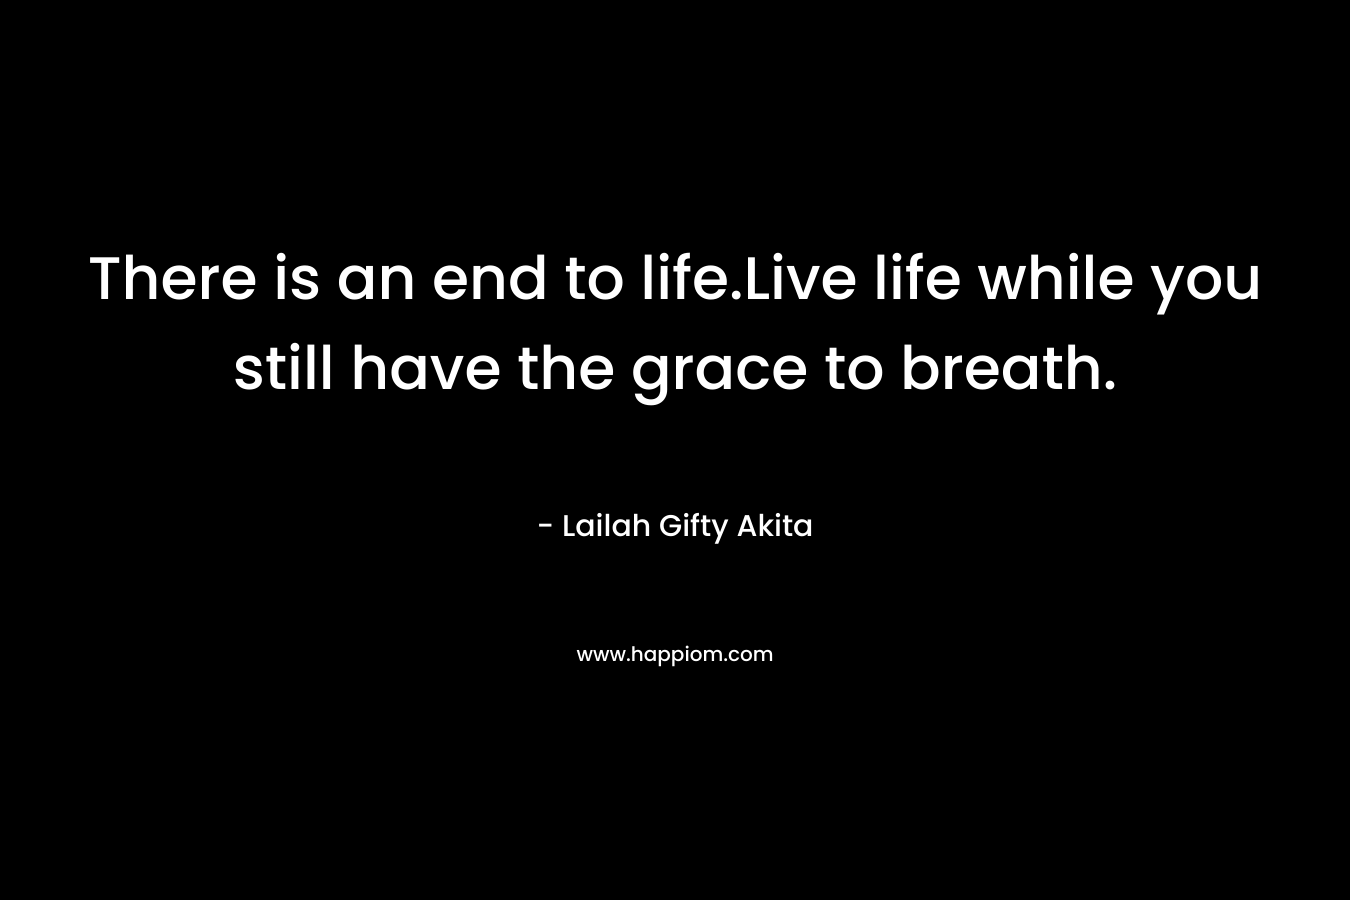 There is an end to life.Live life while you still have the grace to breath.